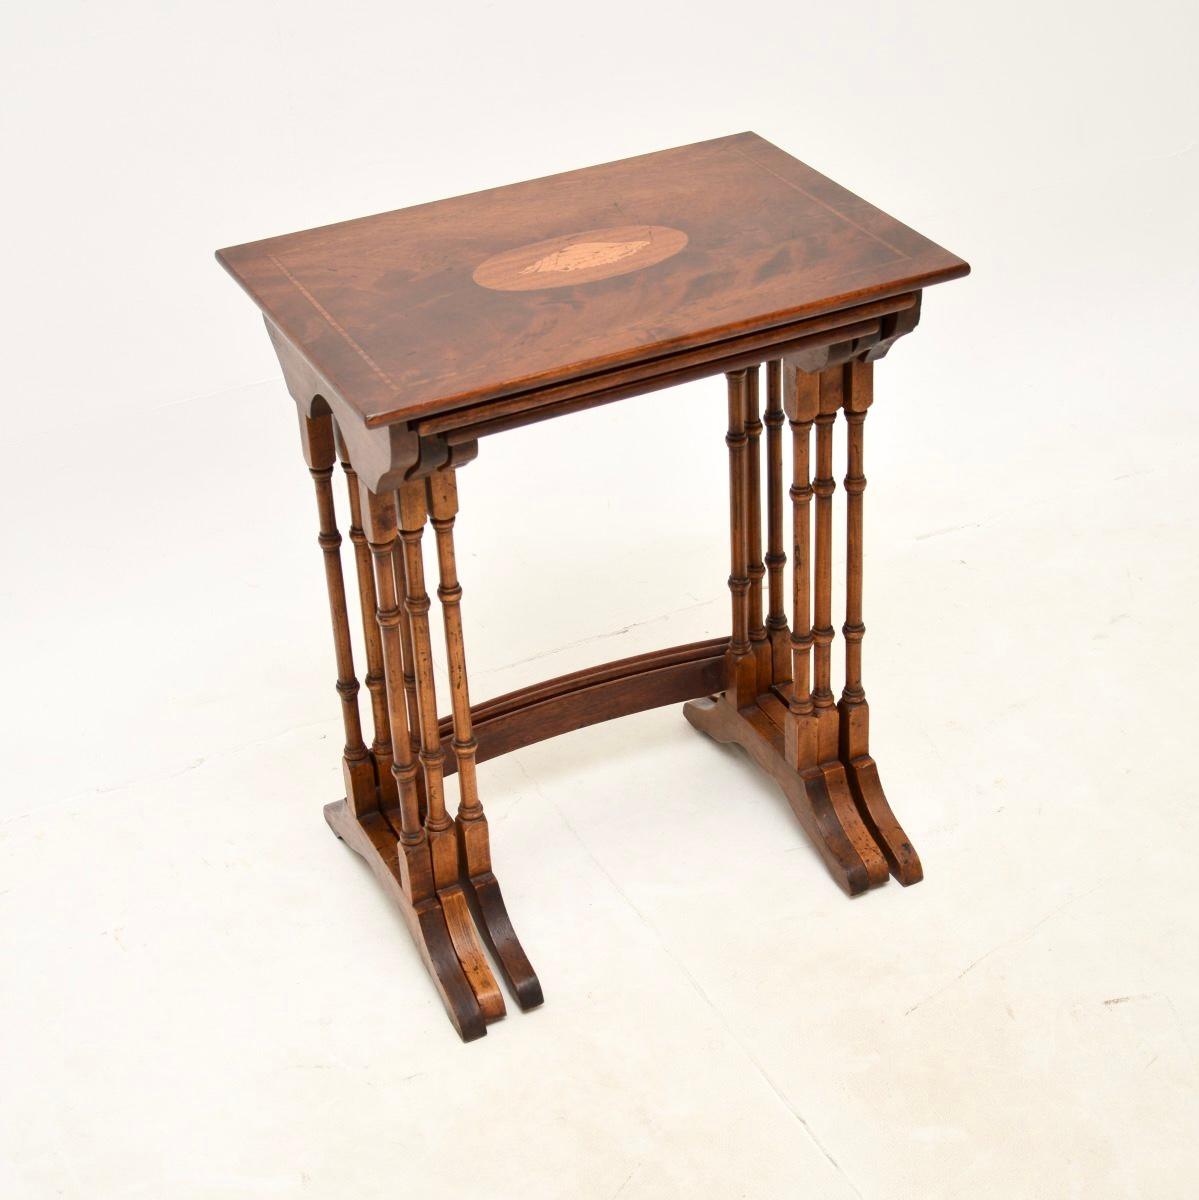 A smart and very well made antique Georgian style nest of tables. They were made in England, and date from around the 1950’s.

They are of great quality, with stunning satinwood inlays. The three tables nest under each other smoothly, they have